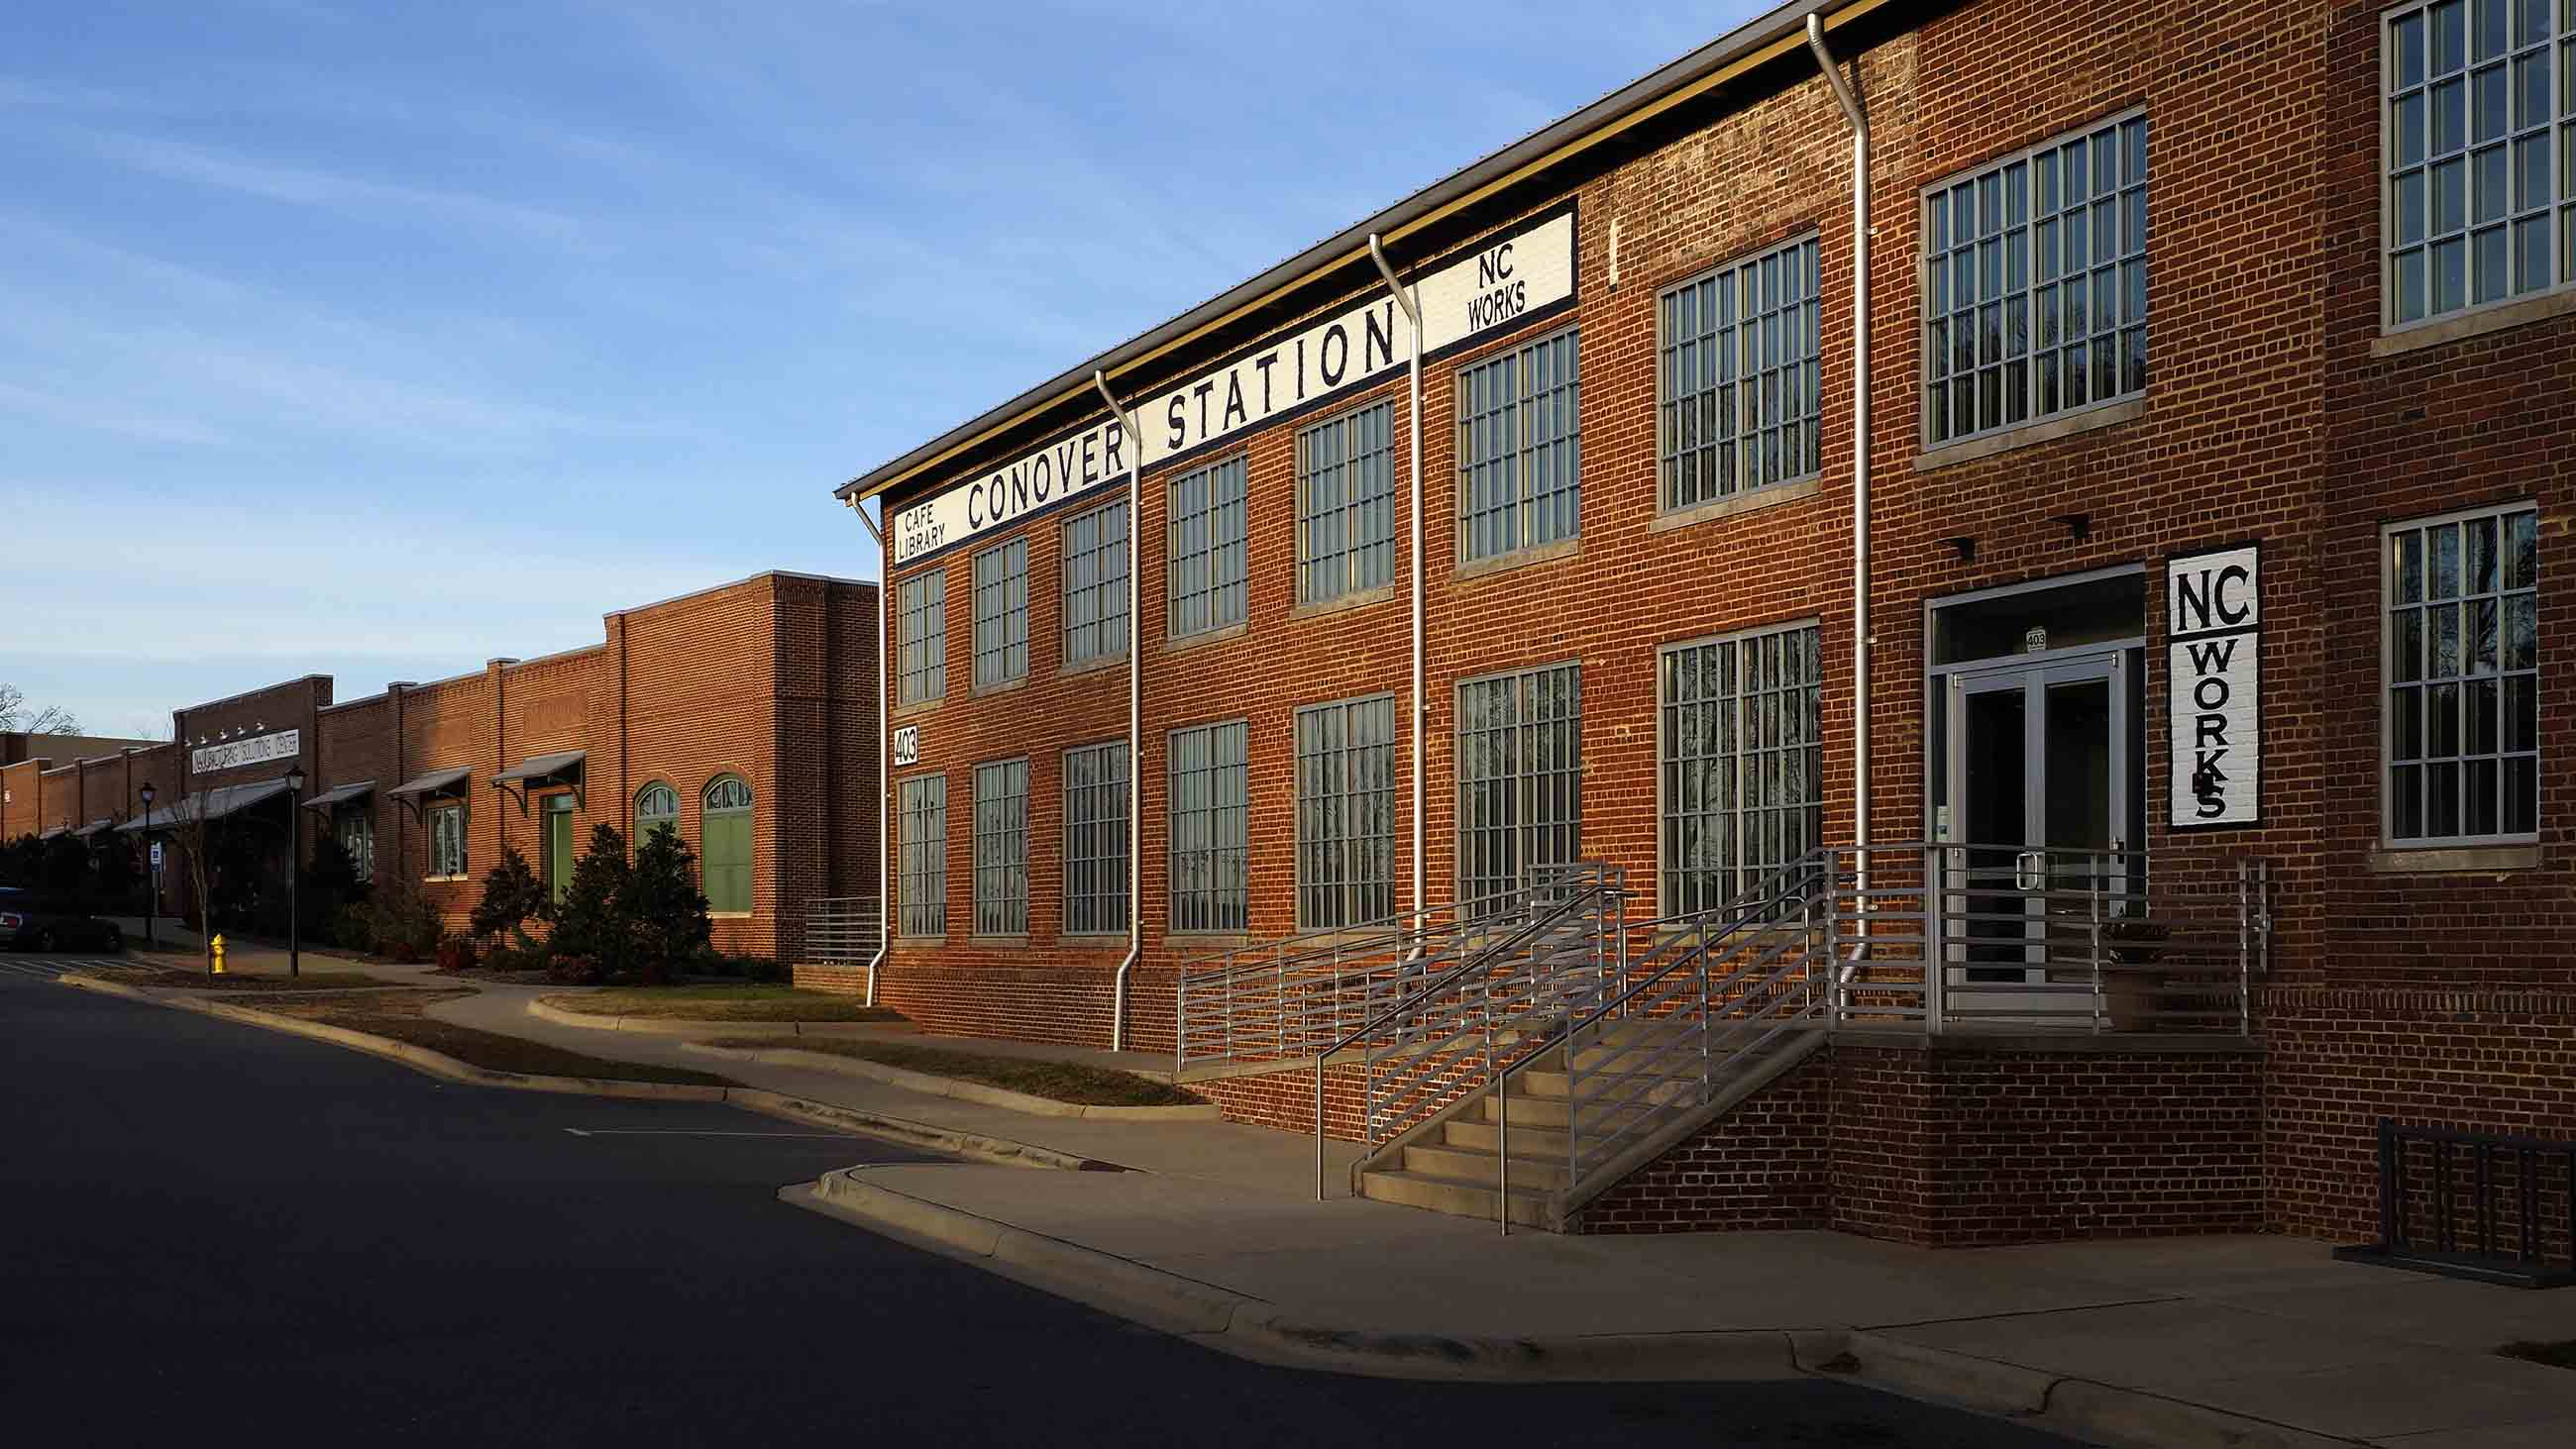 The Manufacturing Solutions Center, a division of the Catawba Valley Community College, provides research, training, and product testing for 1,500 companies worldwide. The buildings were built to resemble the classic fabric mills of the early 20th century. Image by Larry C. Price. United States, 2016.